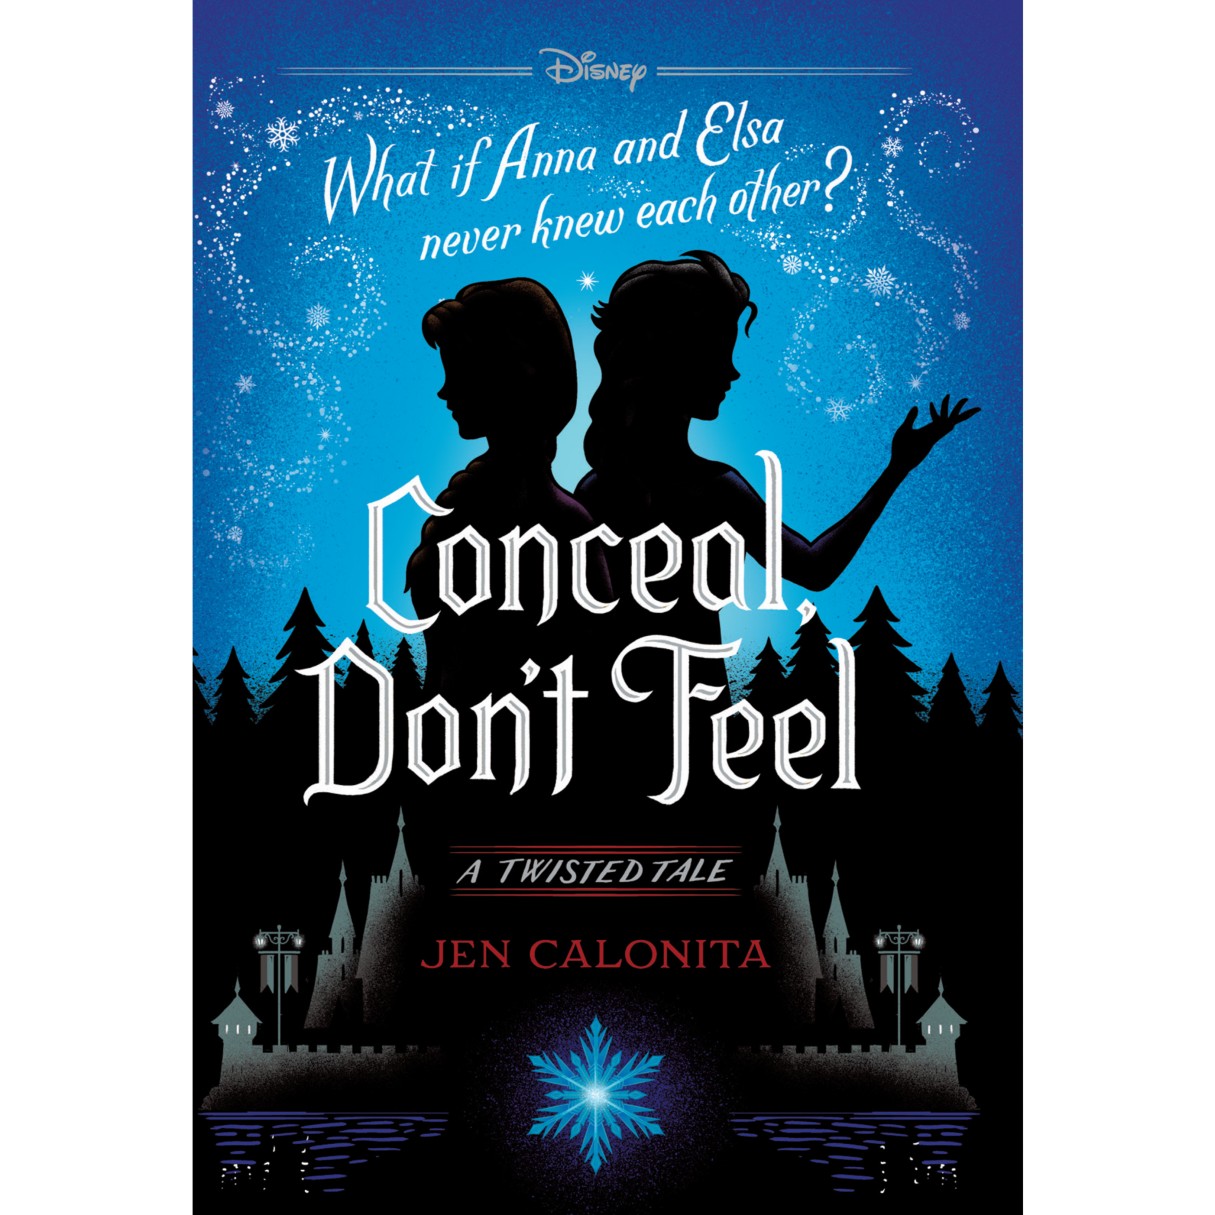 Frozen: Conceal Don't Feel Book